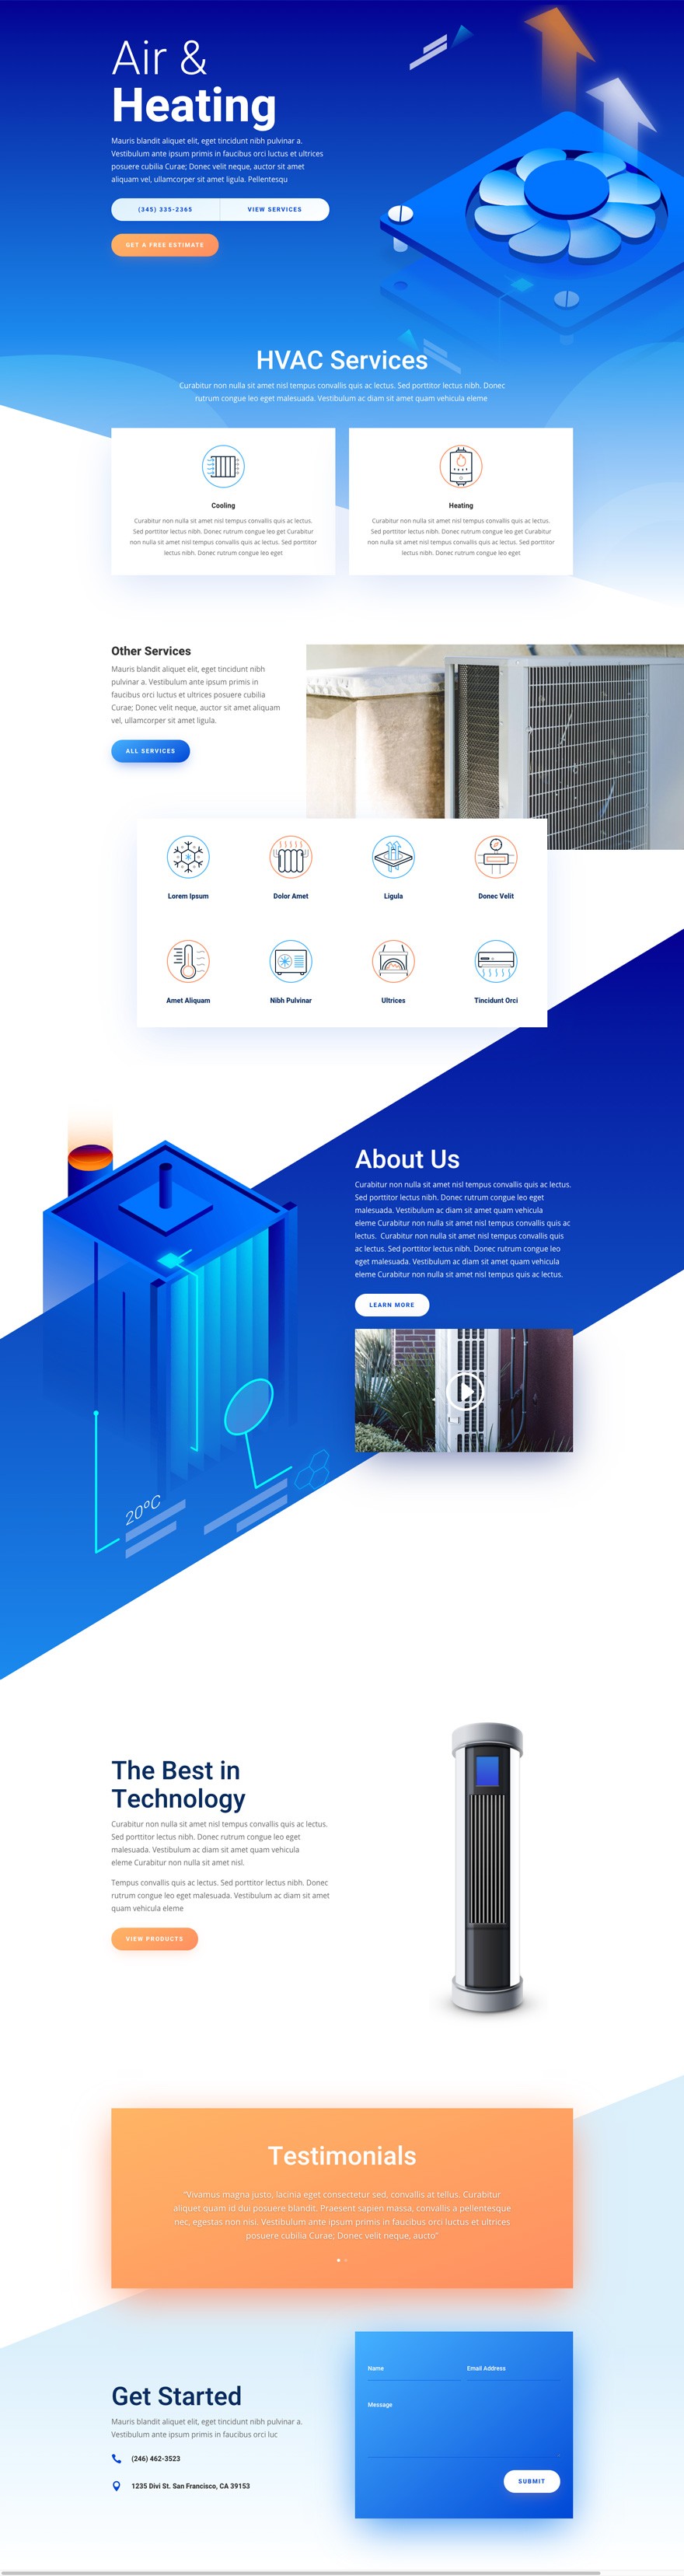 divi-visual-web-page-builder-malaysia-beautiful-stunning-easy-to-use-heat-air-condition-ventilation-landing-page-theme-wordpress